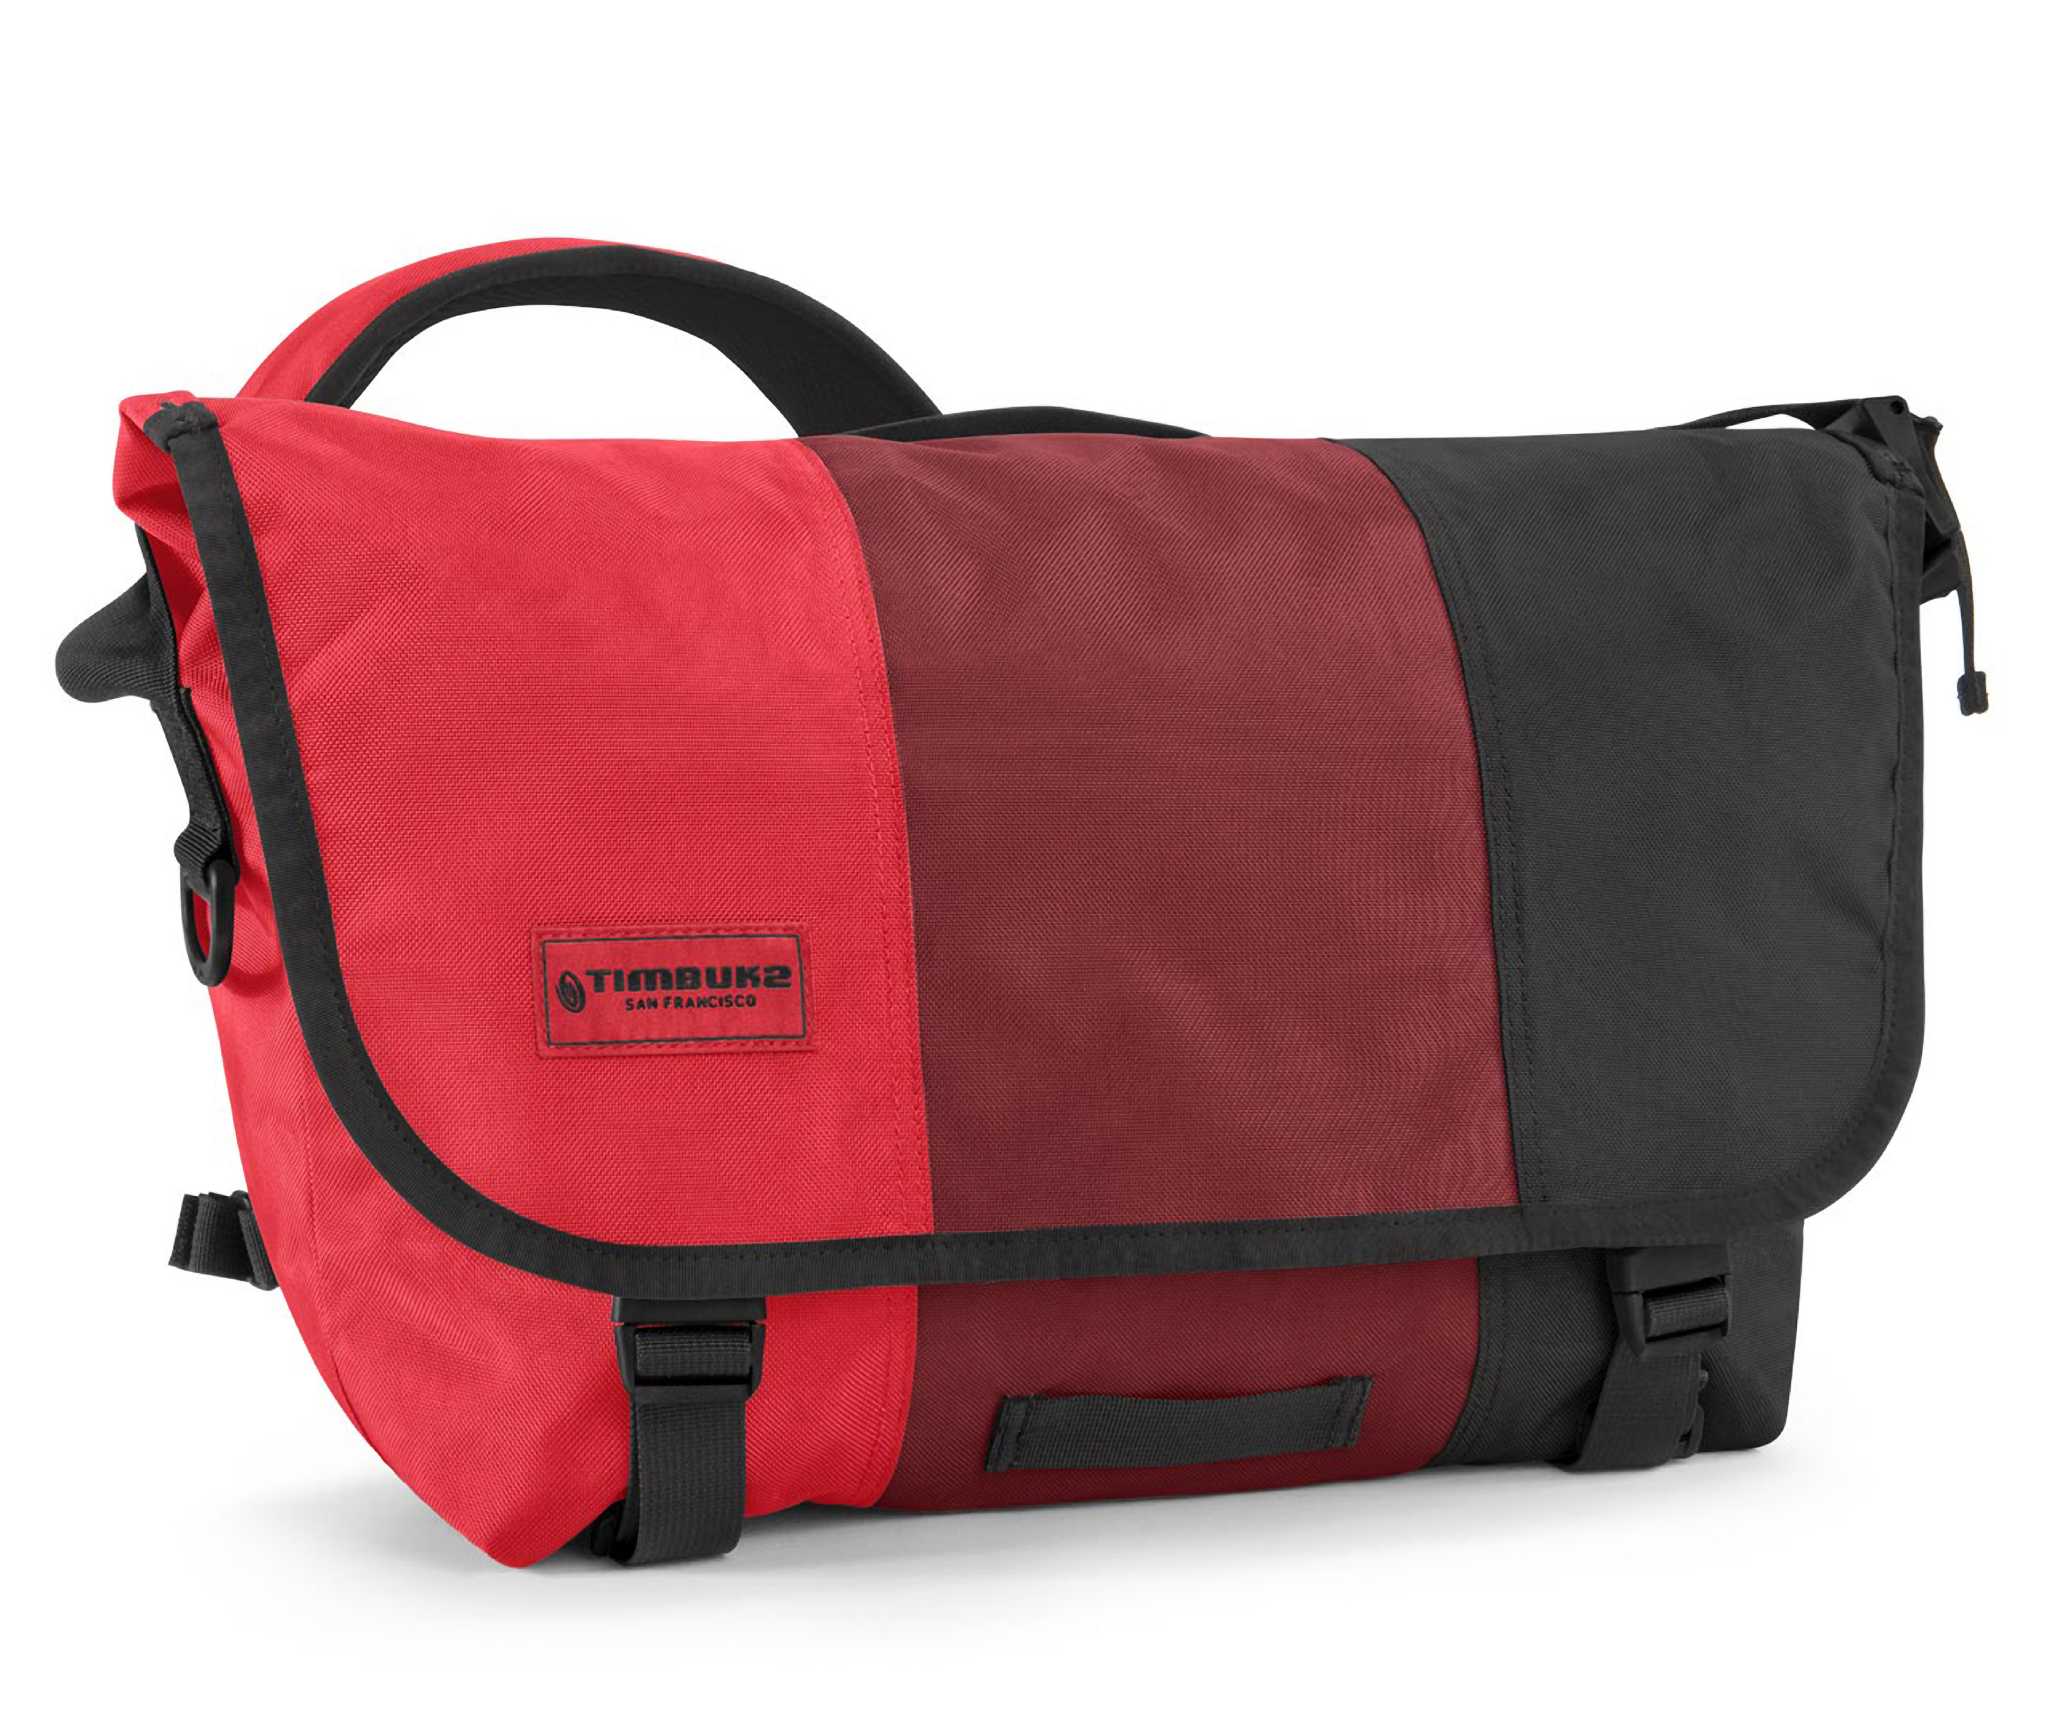 Why the Timbuk2 messenger bag goes the distance